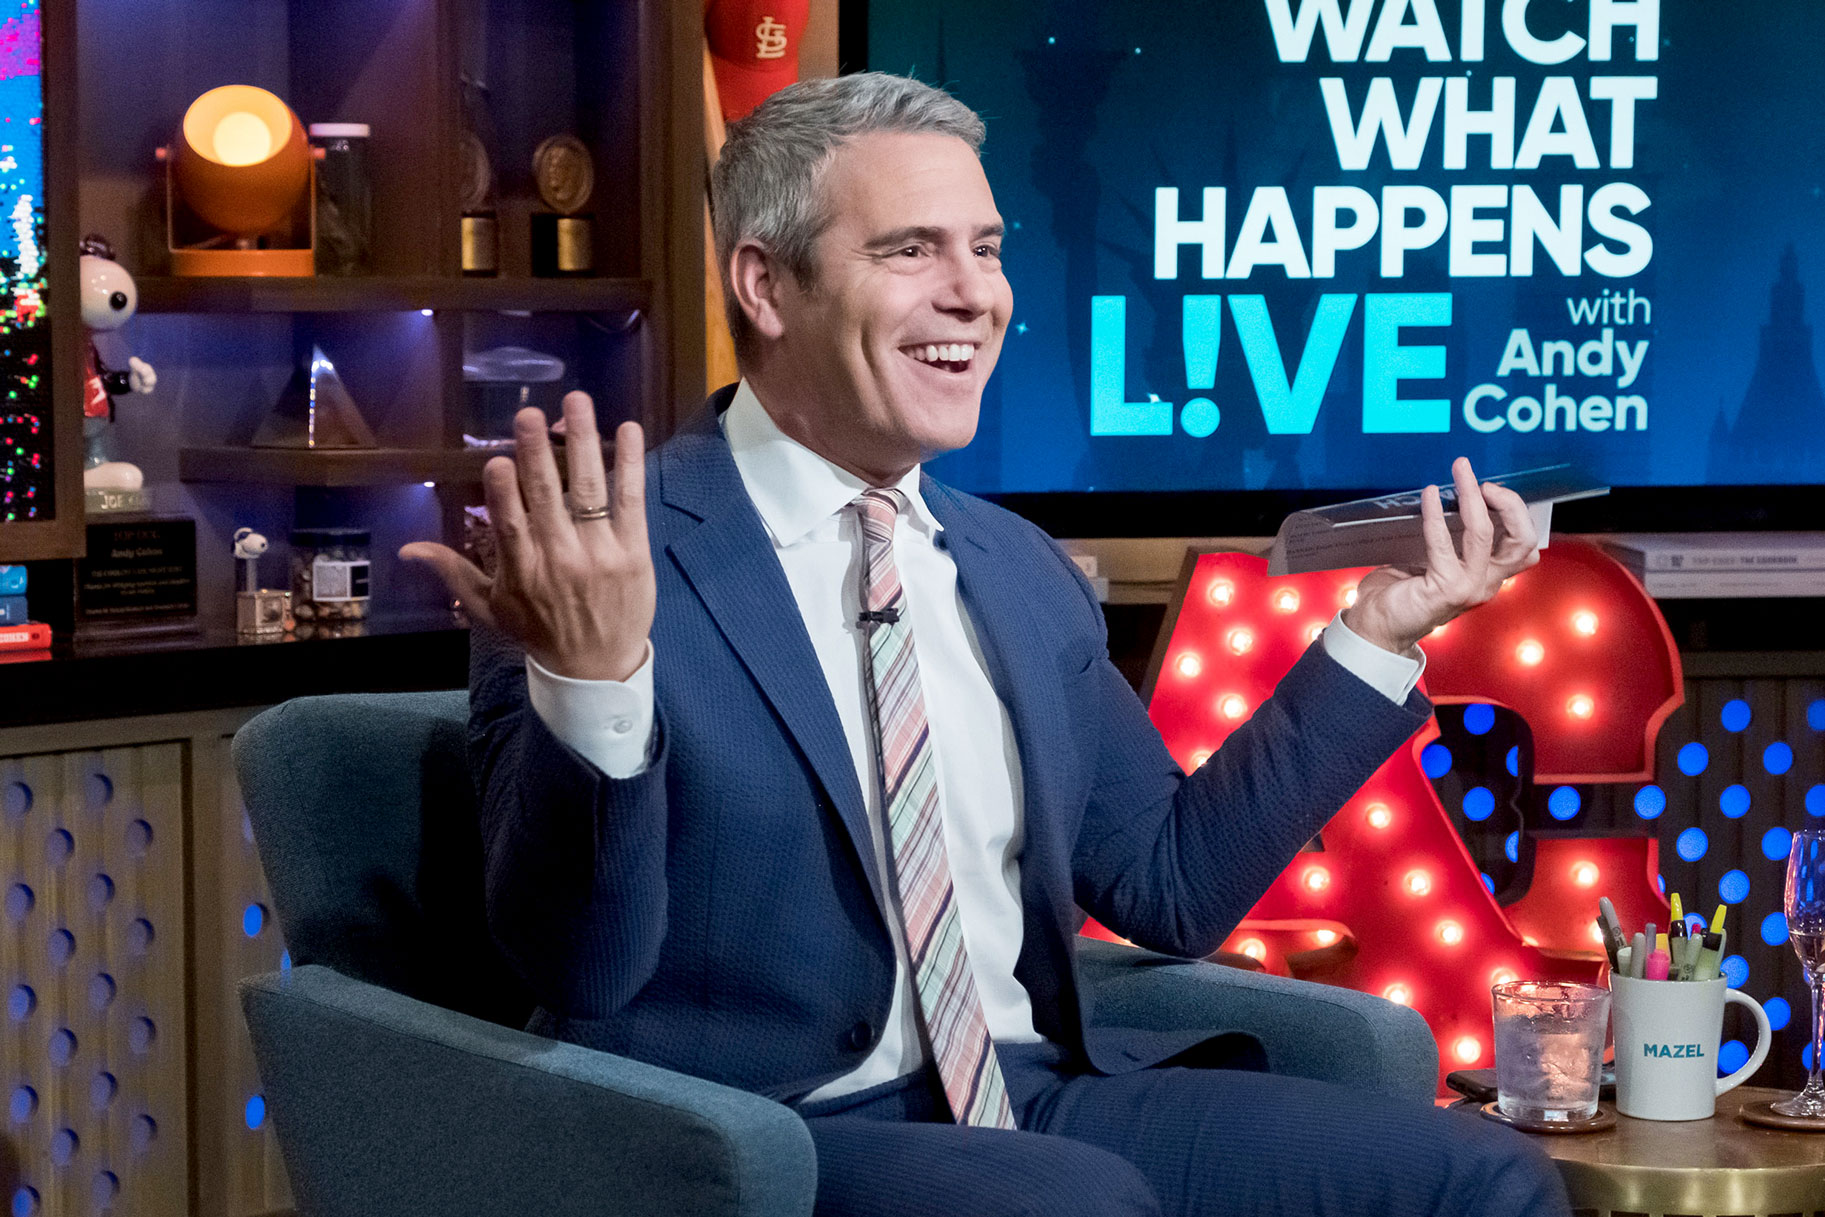 Andy Cohen on Watch What Happens Live